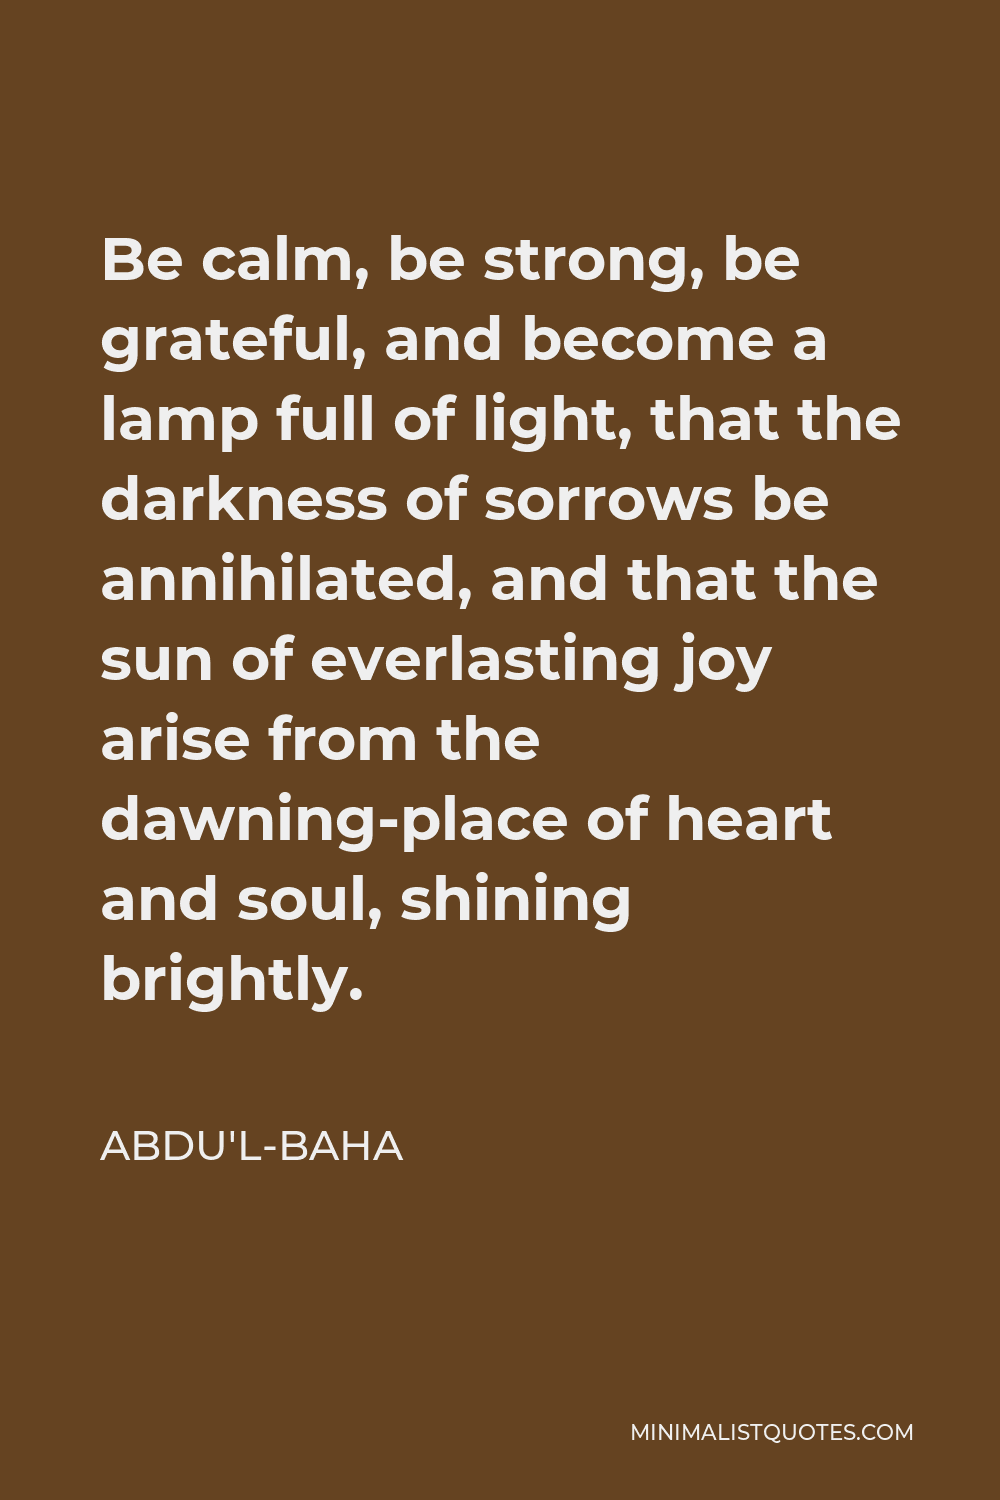 Abdu'l-Baha Quote - Be calm, be strong, be grateful, and become a lamp full of light, that the darkness of sorrows be annihilated, and that the sun of everlasting joy arise from the dawning-place of heart and soul, shining brightly.